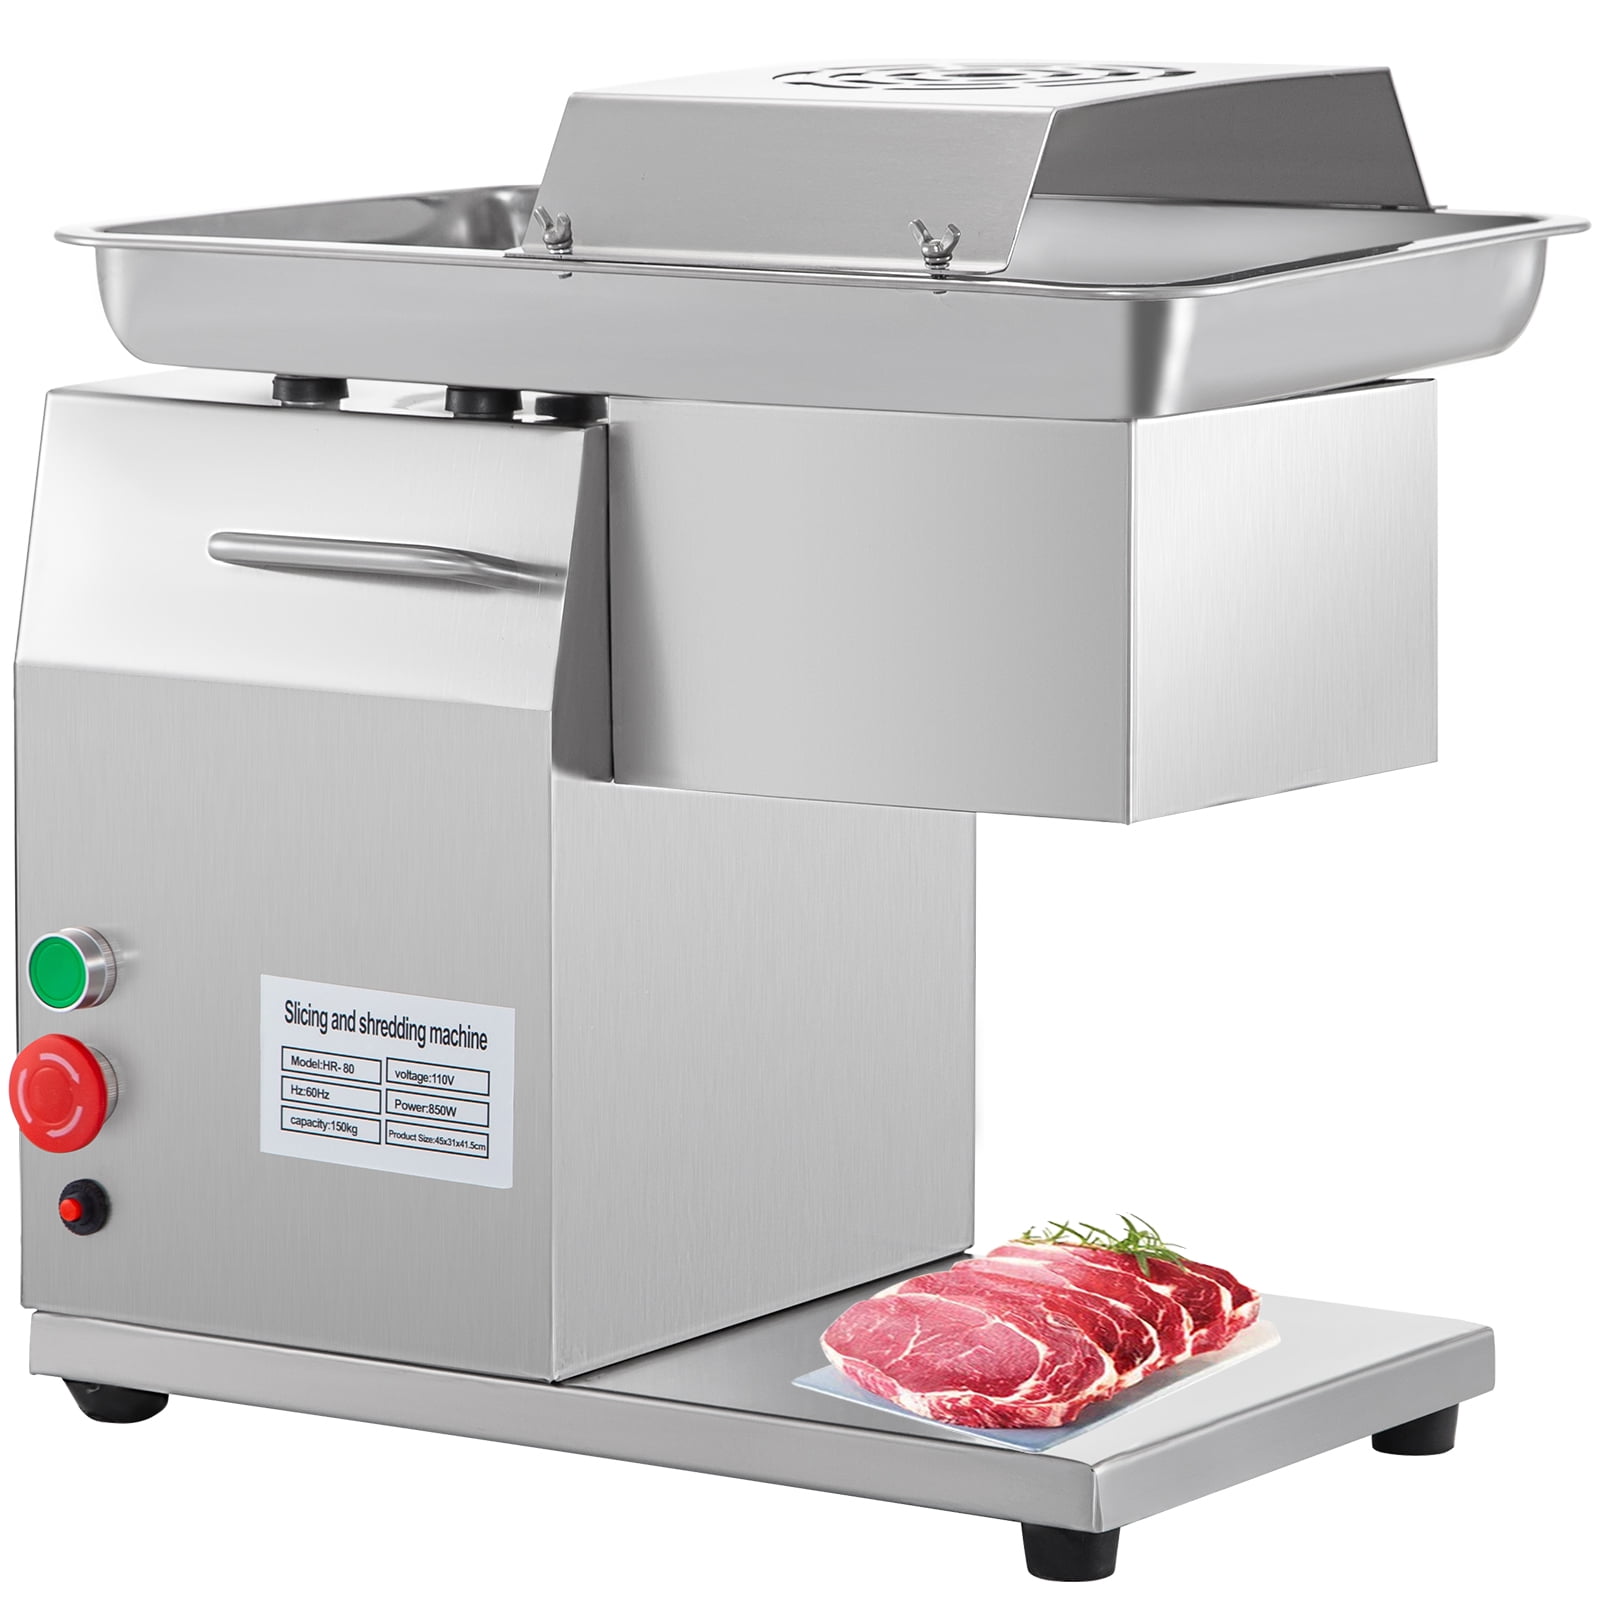 INTBUYING 110V Stainless Steel Meat Cutting Machine Meat Slicer QE 550W 3mm Blade 250Kg/Hour 